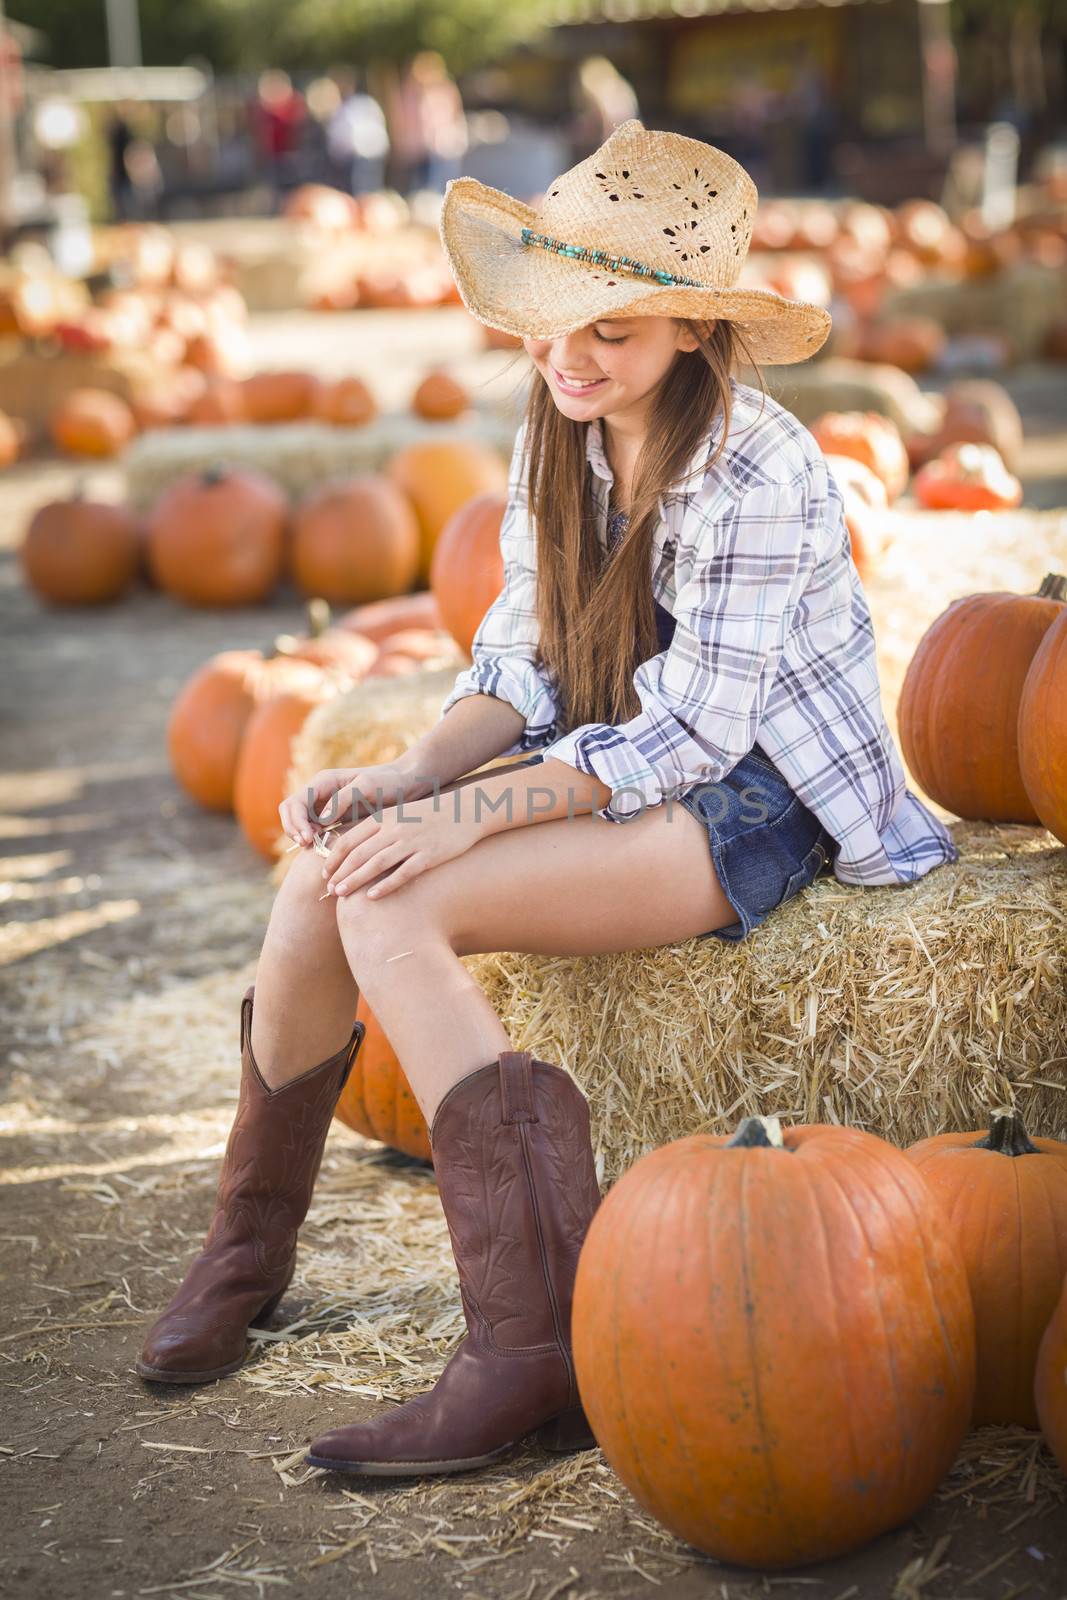 Preteen Girl Portrait at the Pumpkin Patch by Feverpitched